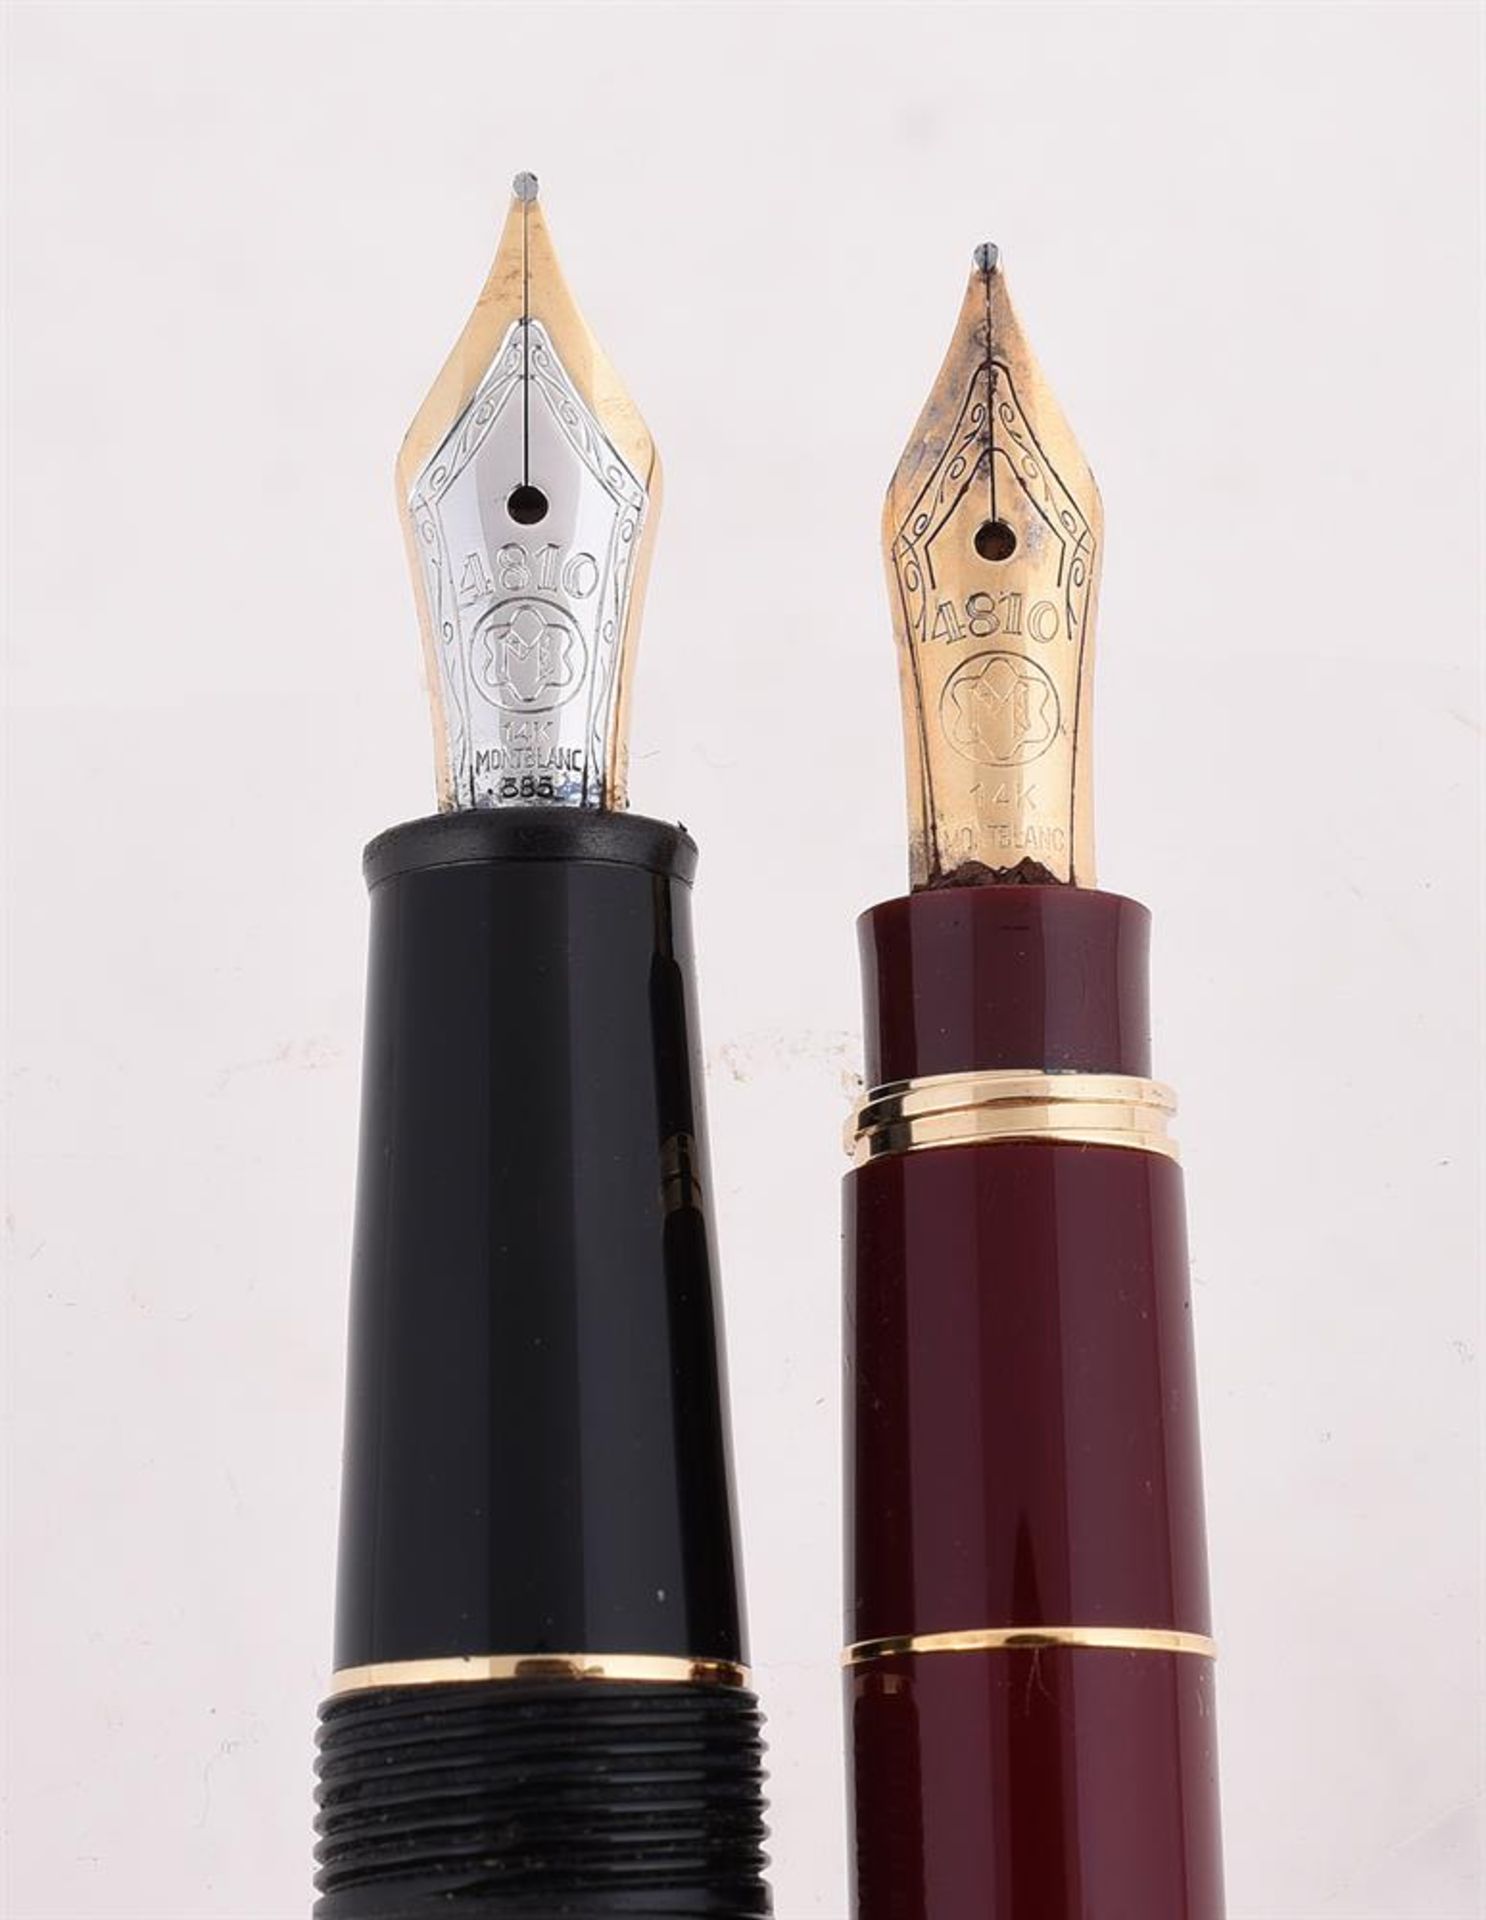 MONTBLANC, MEISTERSTÜCK, A BLACK FOUNTAIN PEN AND BALLPOINT - Image 2 of 2